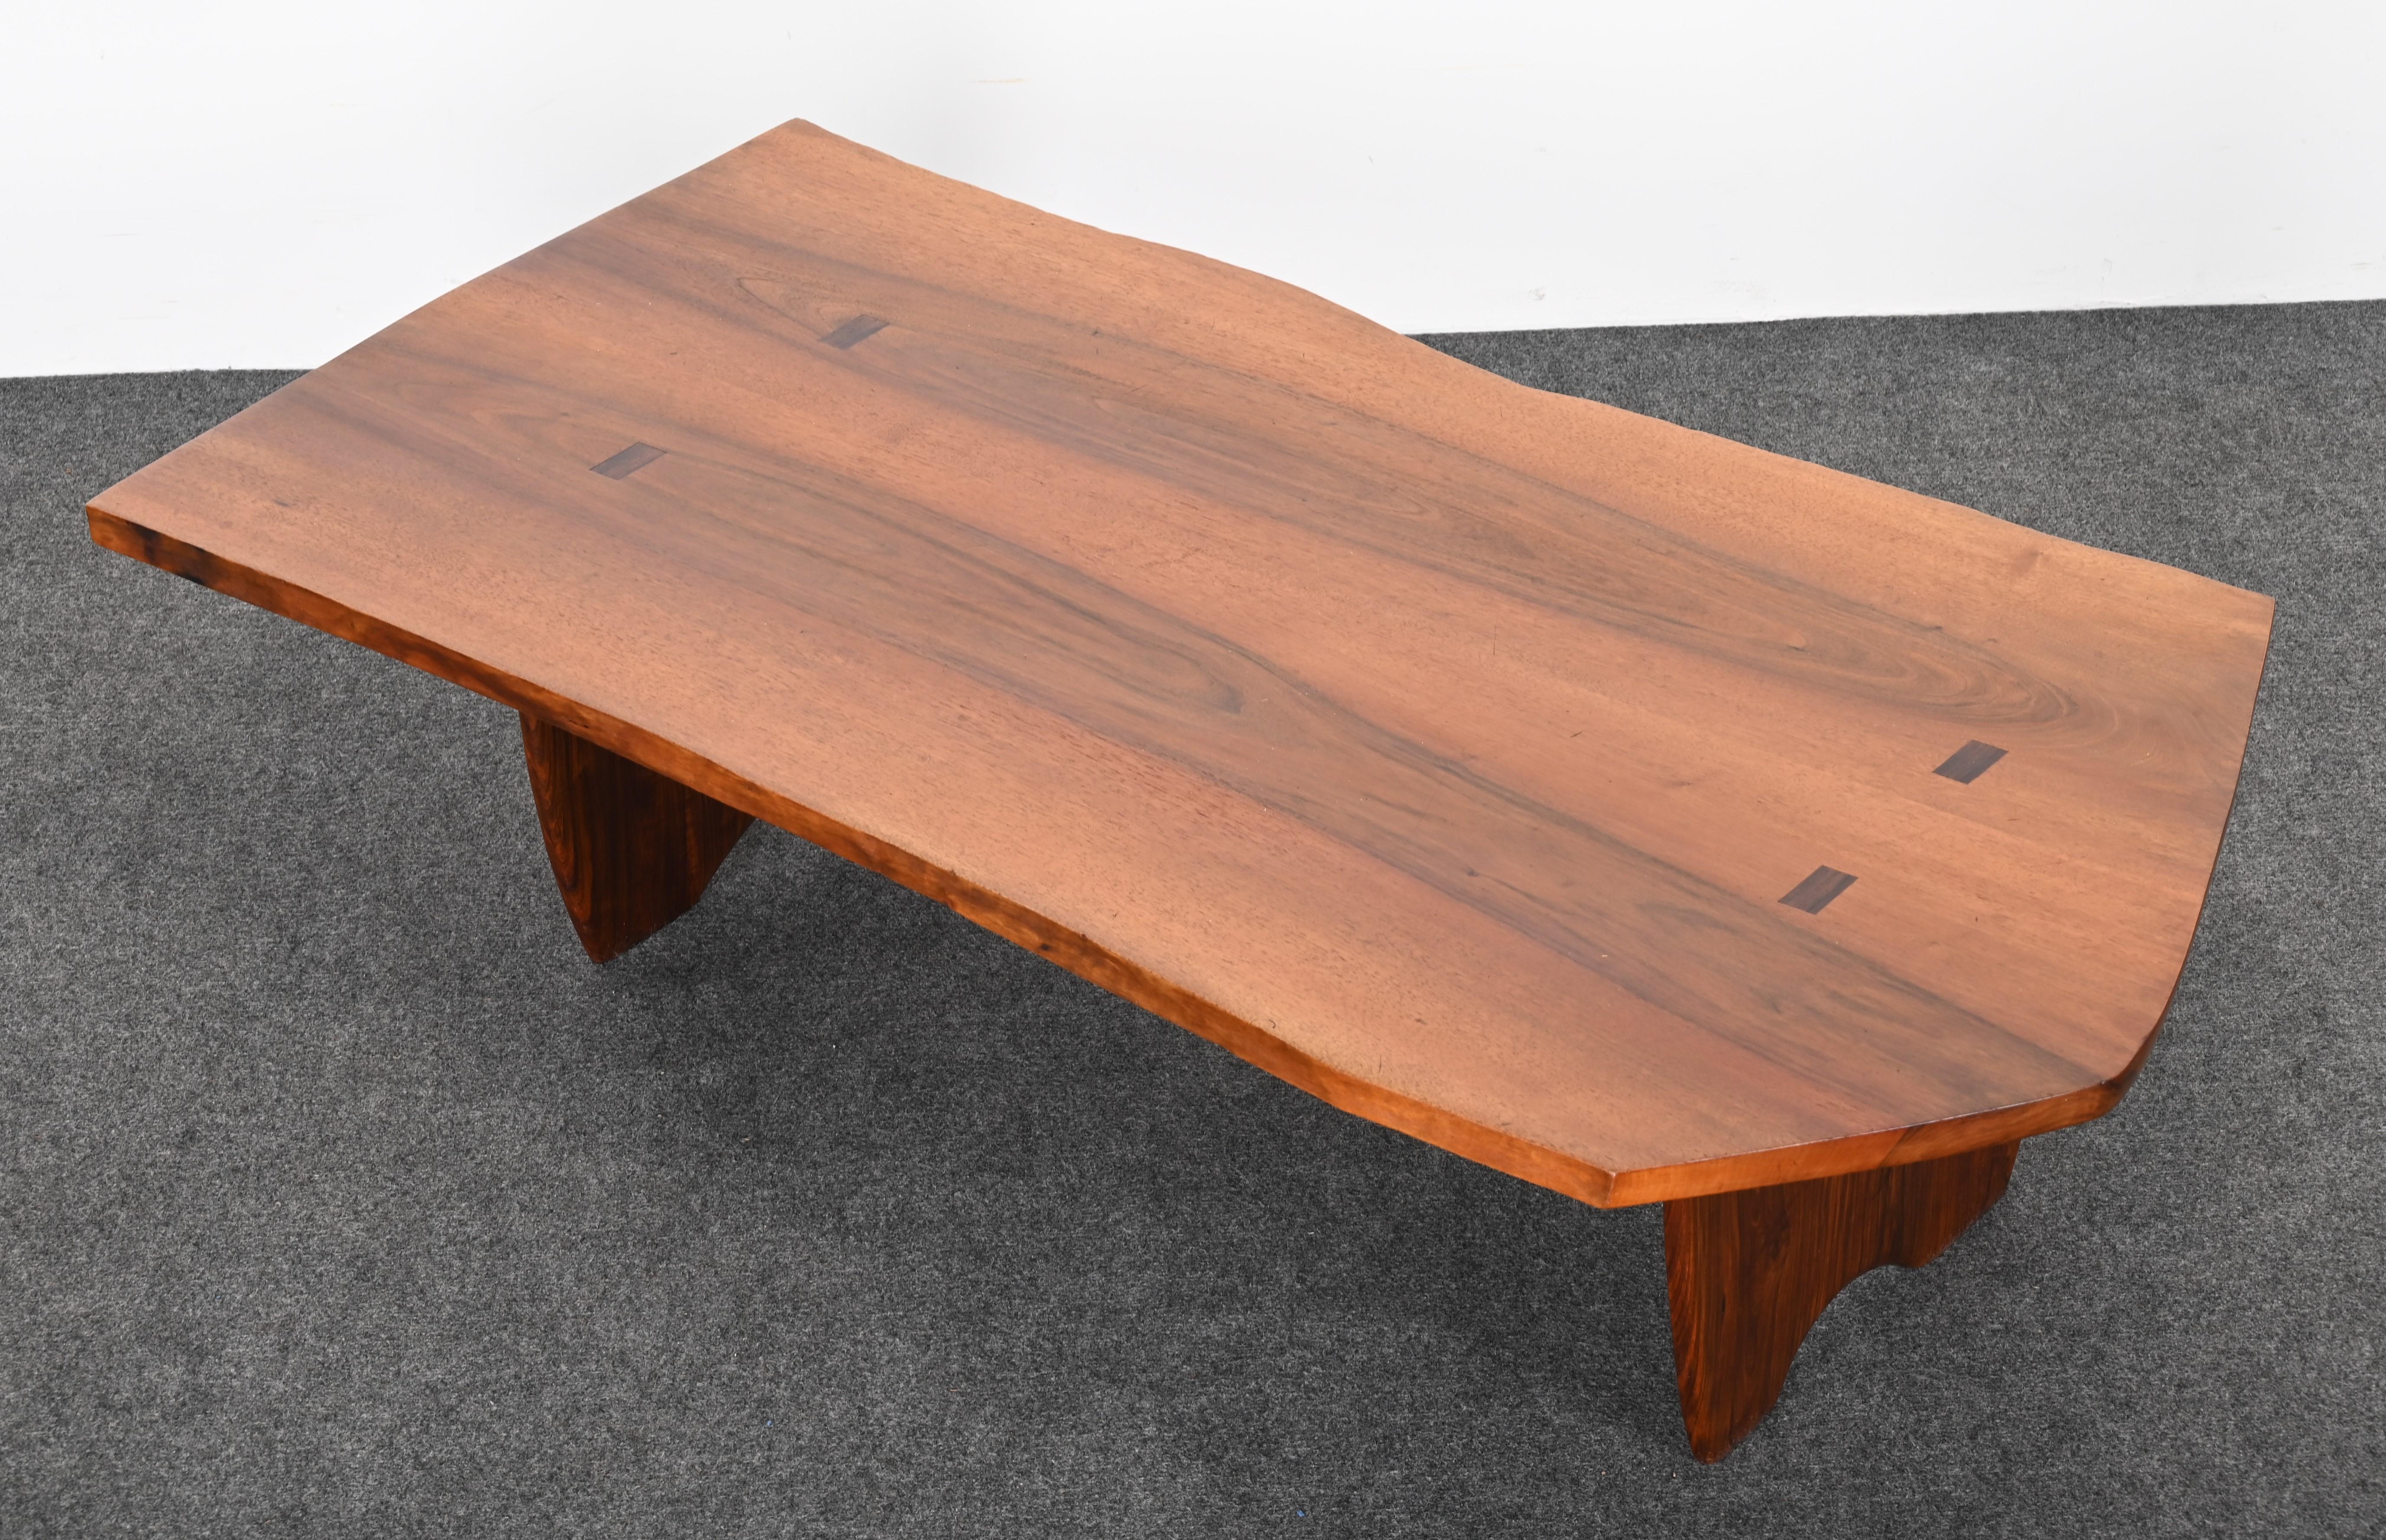 Live Edge Solid Walnut and Rosewood Coffee Table by Richard Rothbard, 1968 For Sale 1